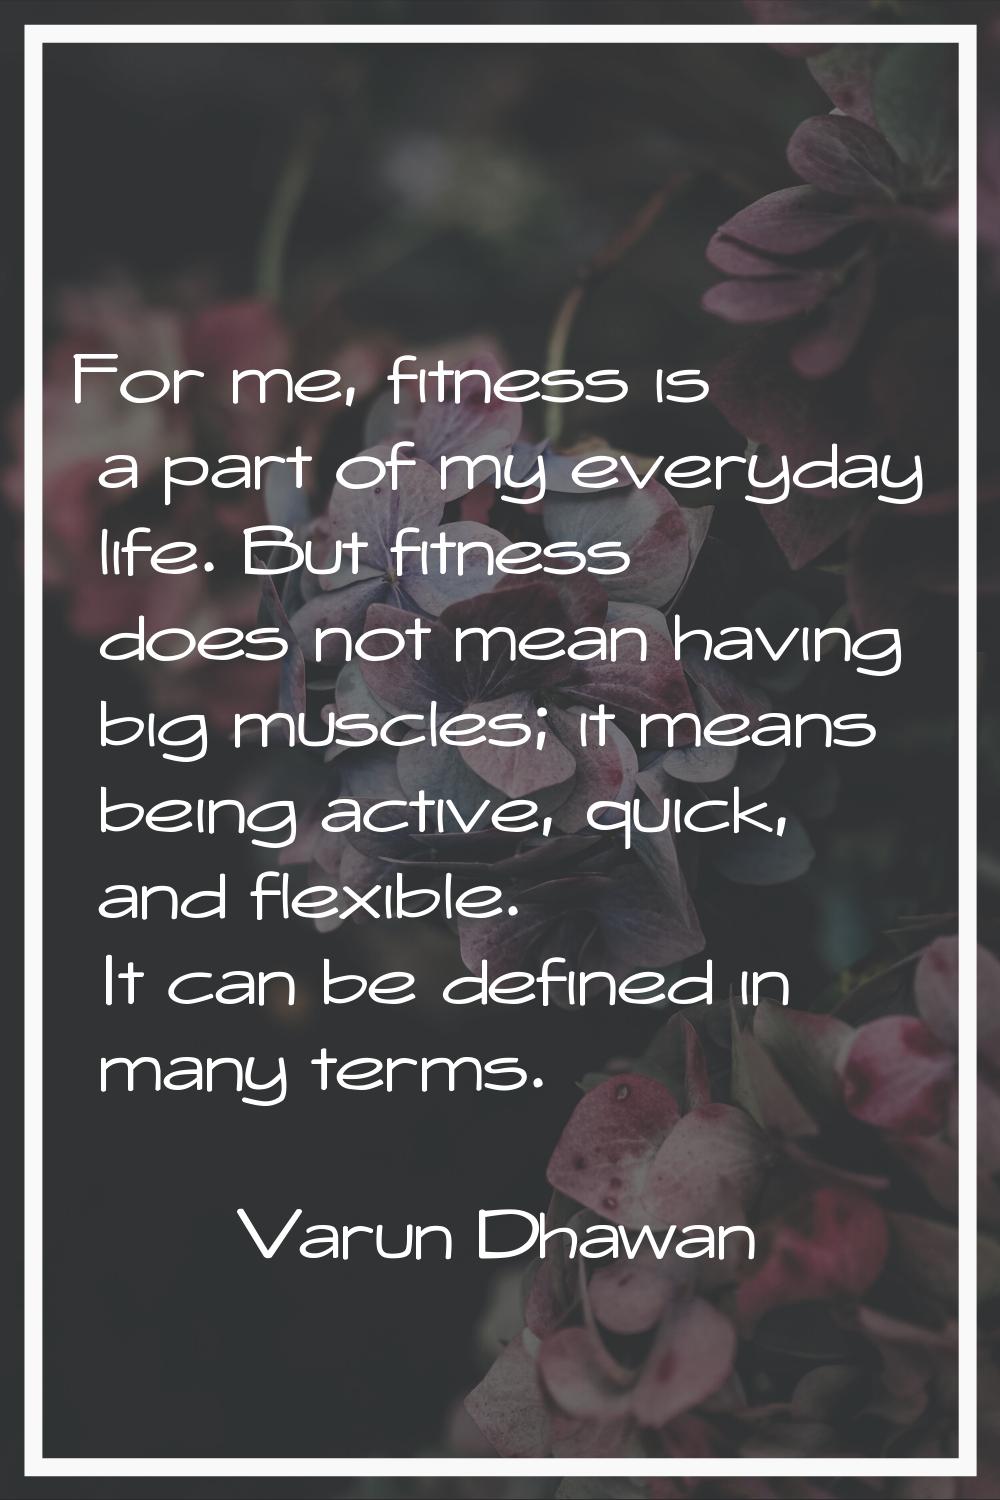 For me, fitness is a part of my everyday life. But fitness does not mean having big muscles; it mea